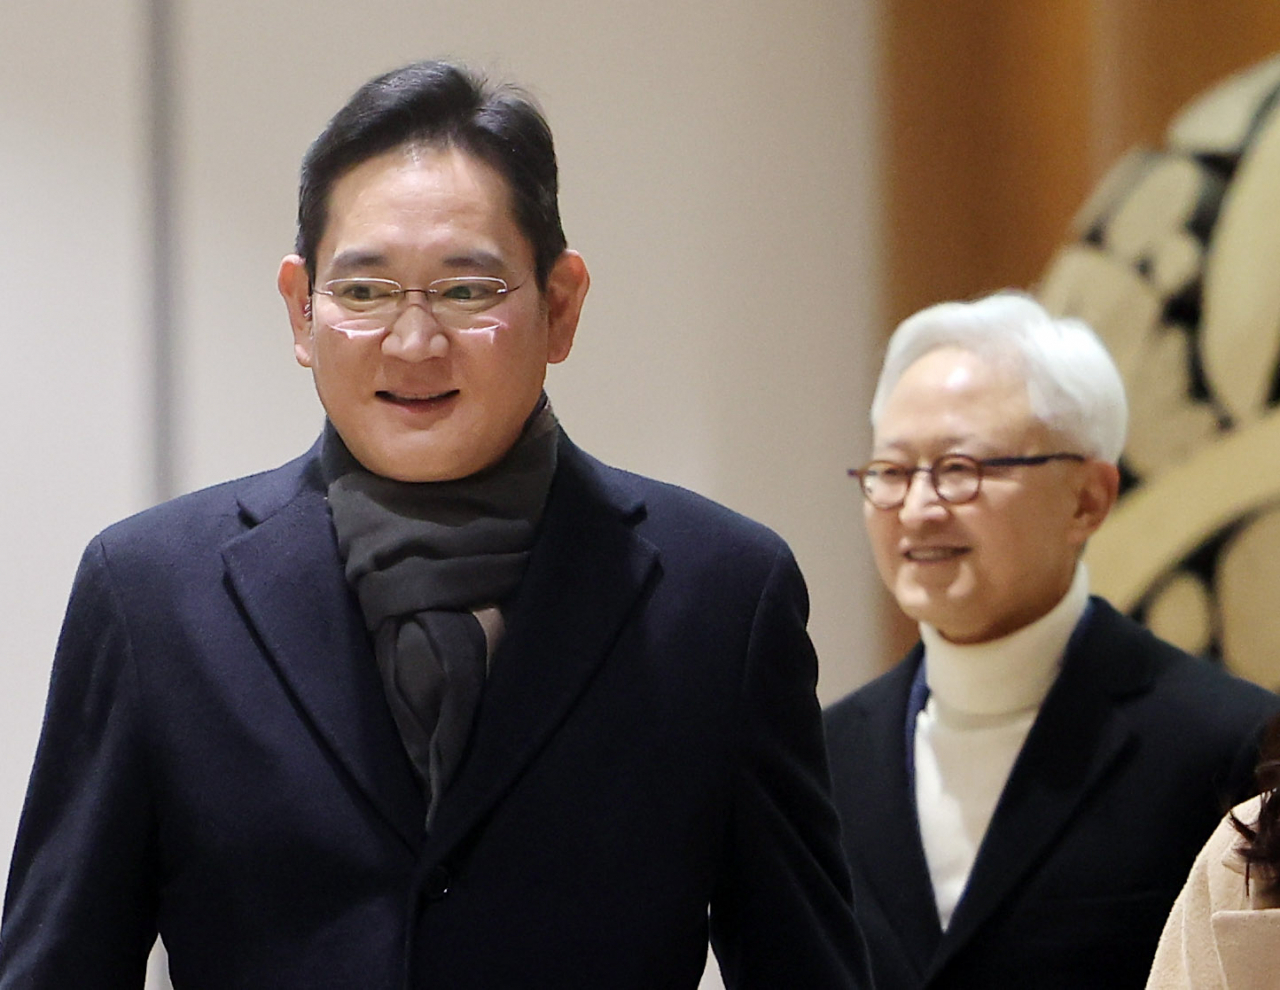 Samsung Electronics Chairman Lee Jae-yong is seen at Gimpo Airport as he returns from his trip to the Netherlands, Dec. 15. (Yonhap)